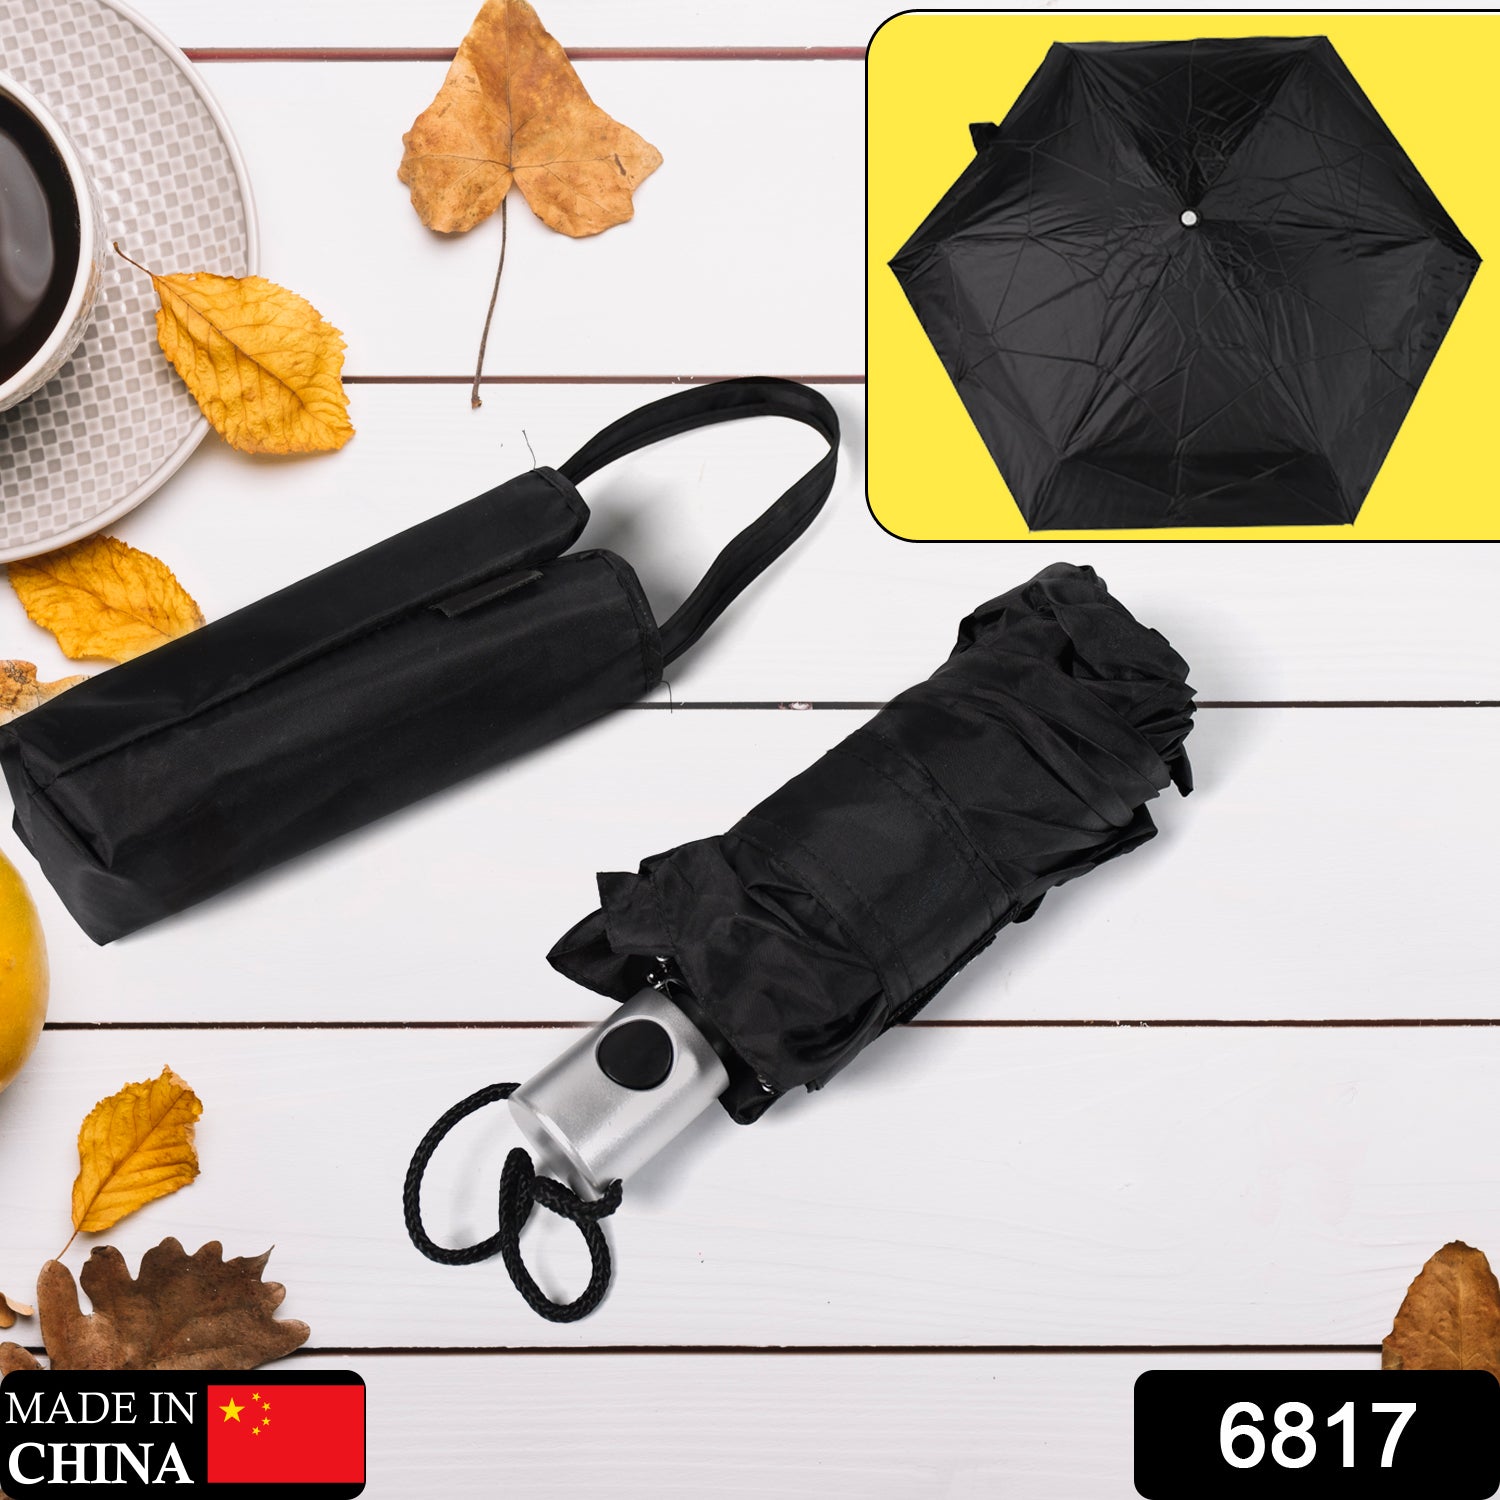 6817  Windproof Travel Umbrella - Compact, Light, Automatic, Strong and Portable - Wind Resistant, Small Folding Backpack Umbrella for Rain 